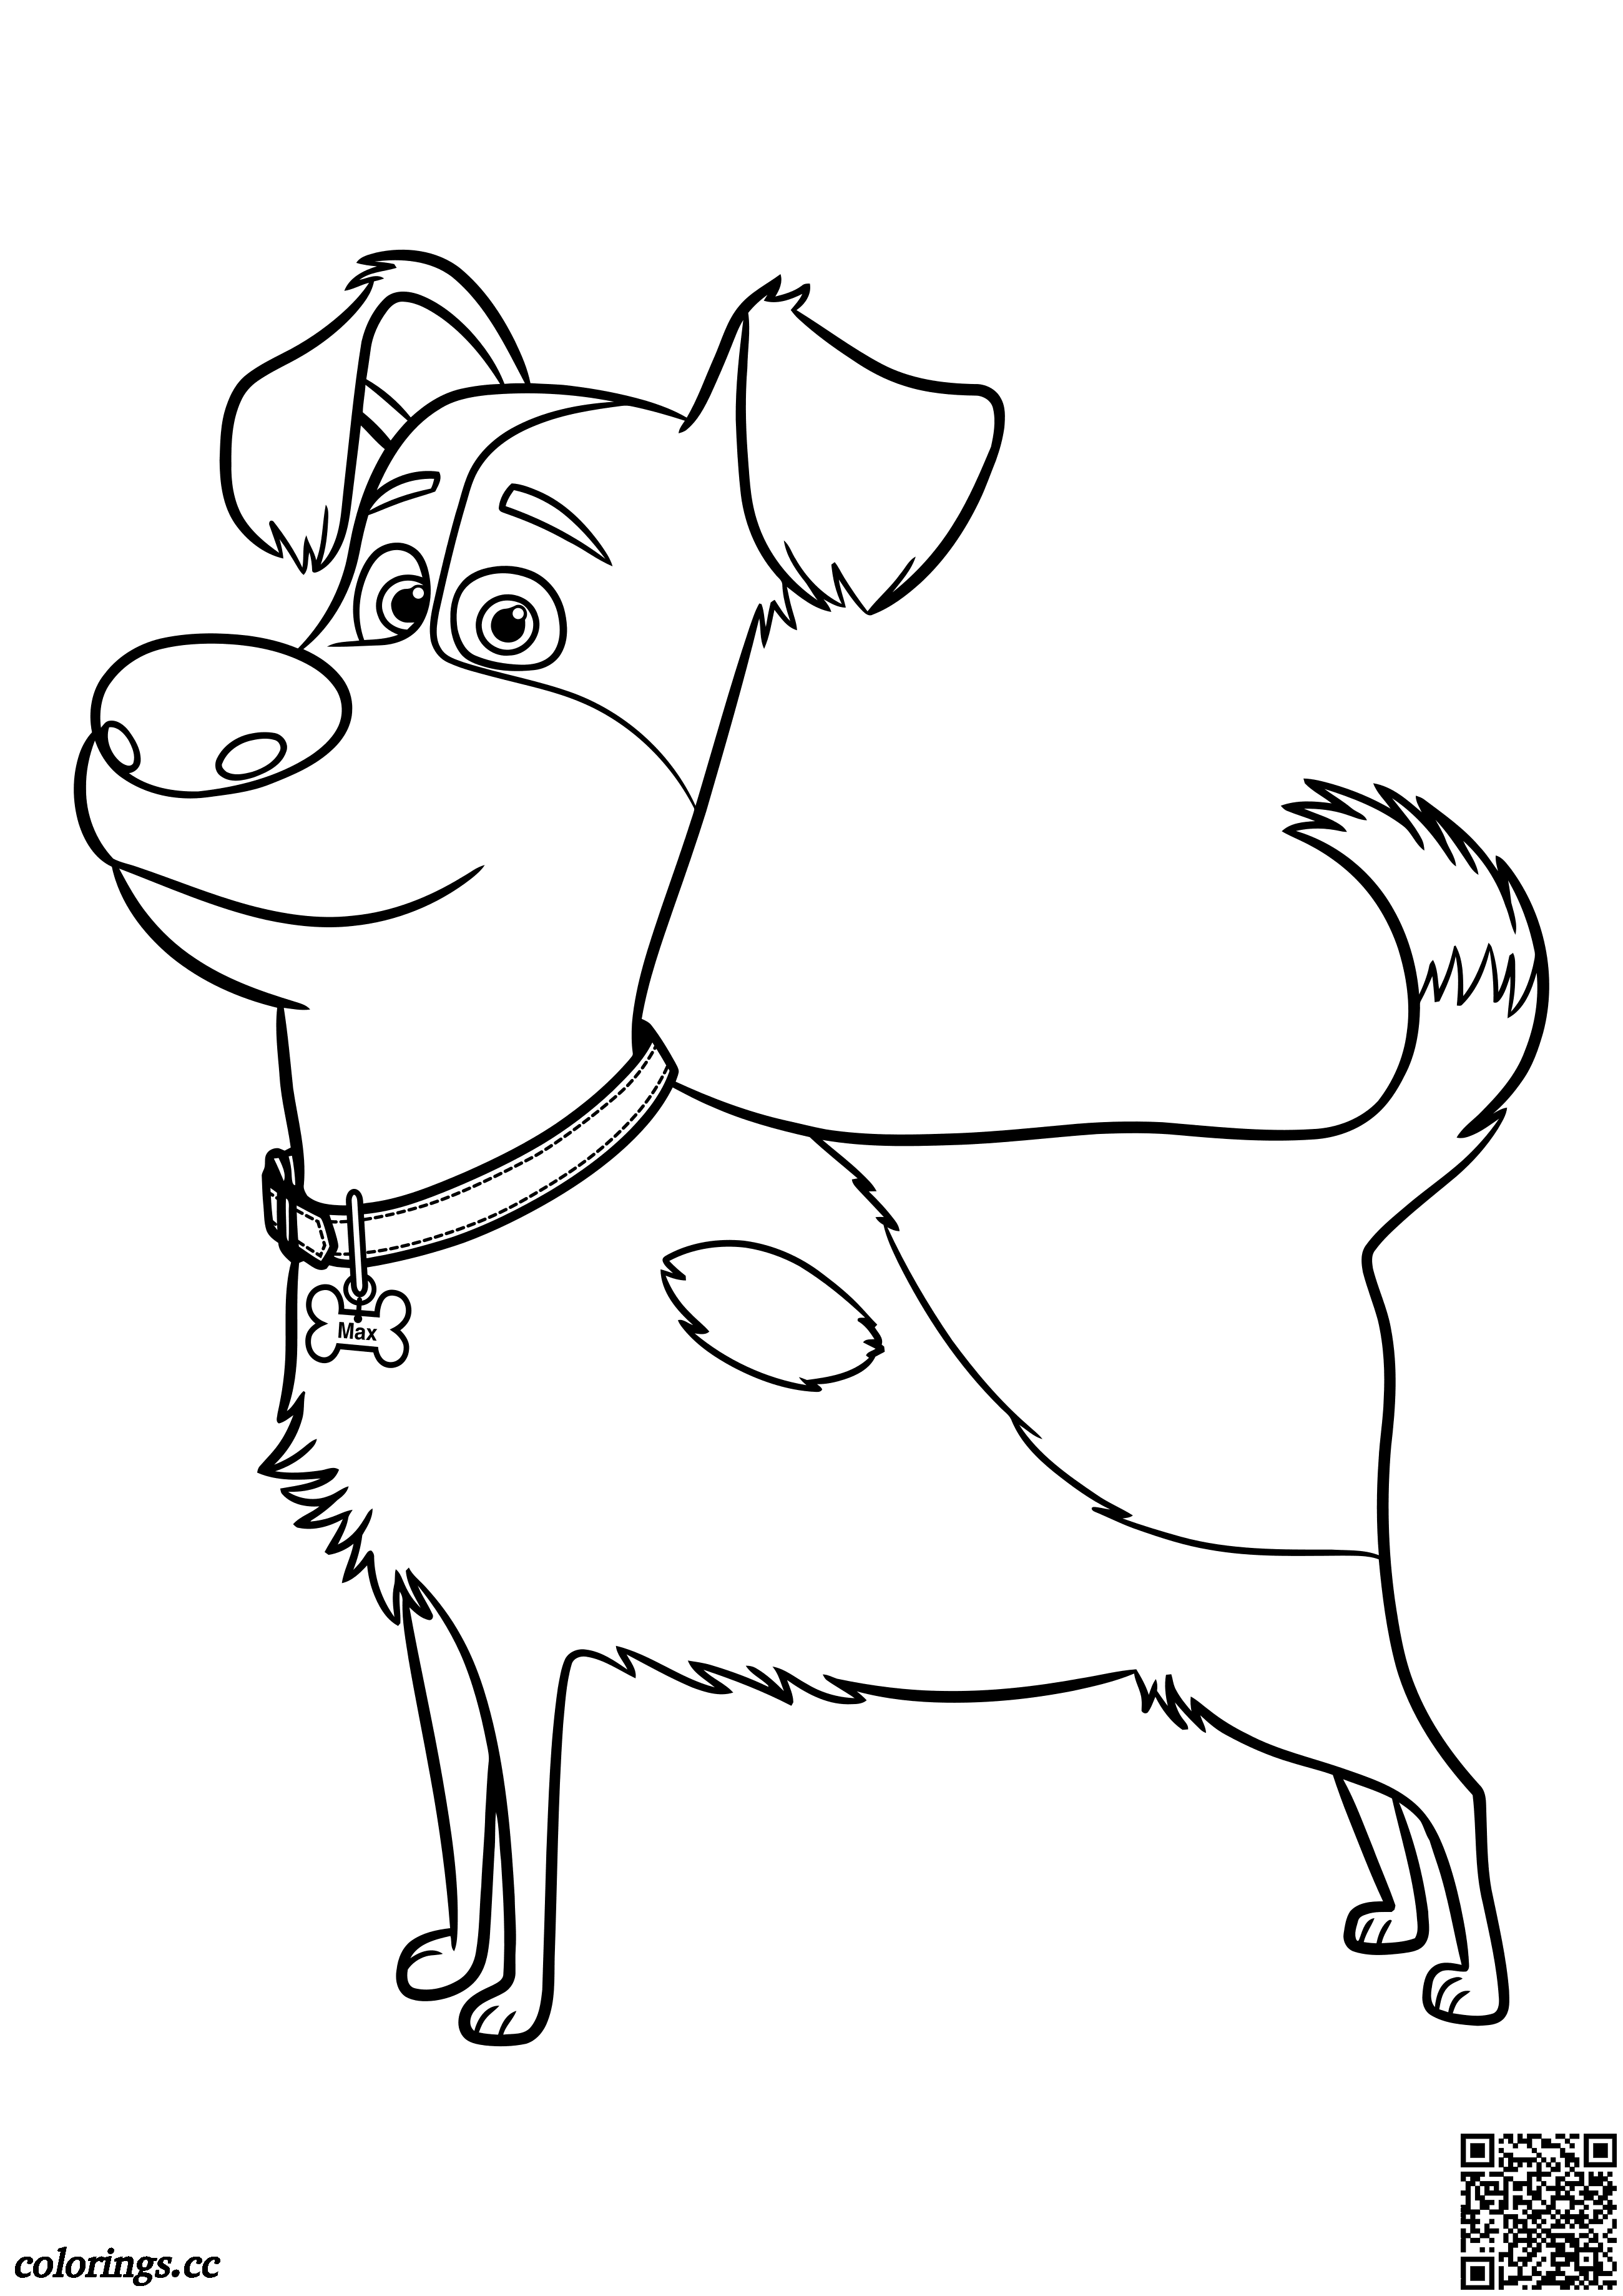 Puppy Max coloring pages, The Secret Life of Pets coloring pages ...